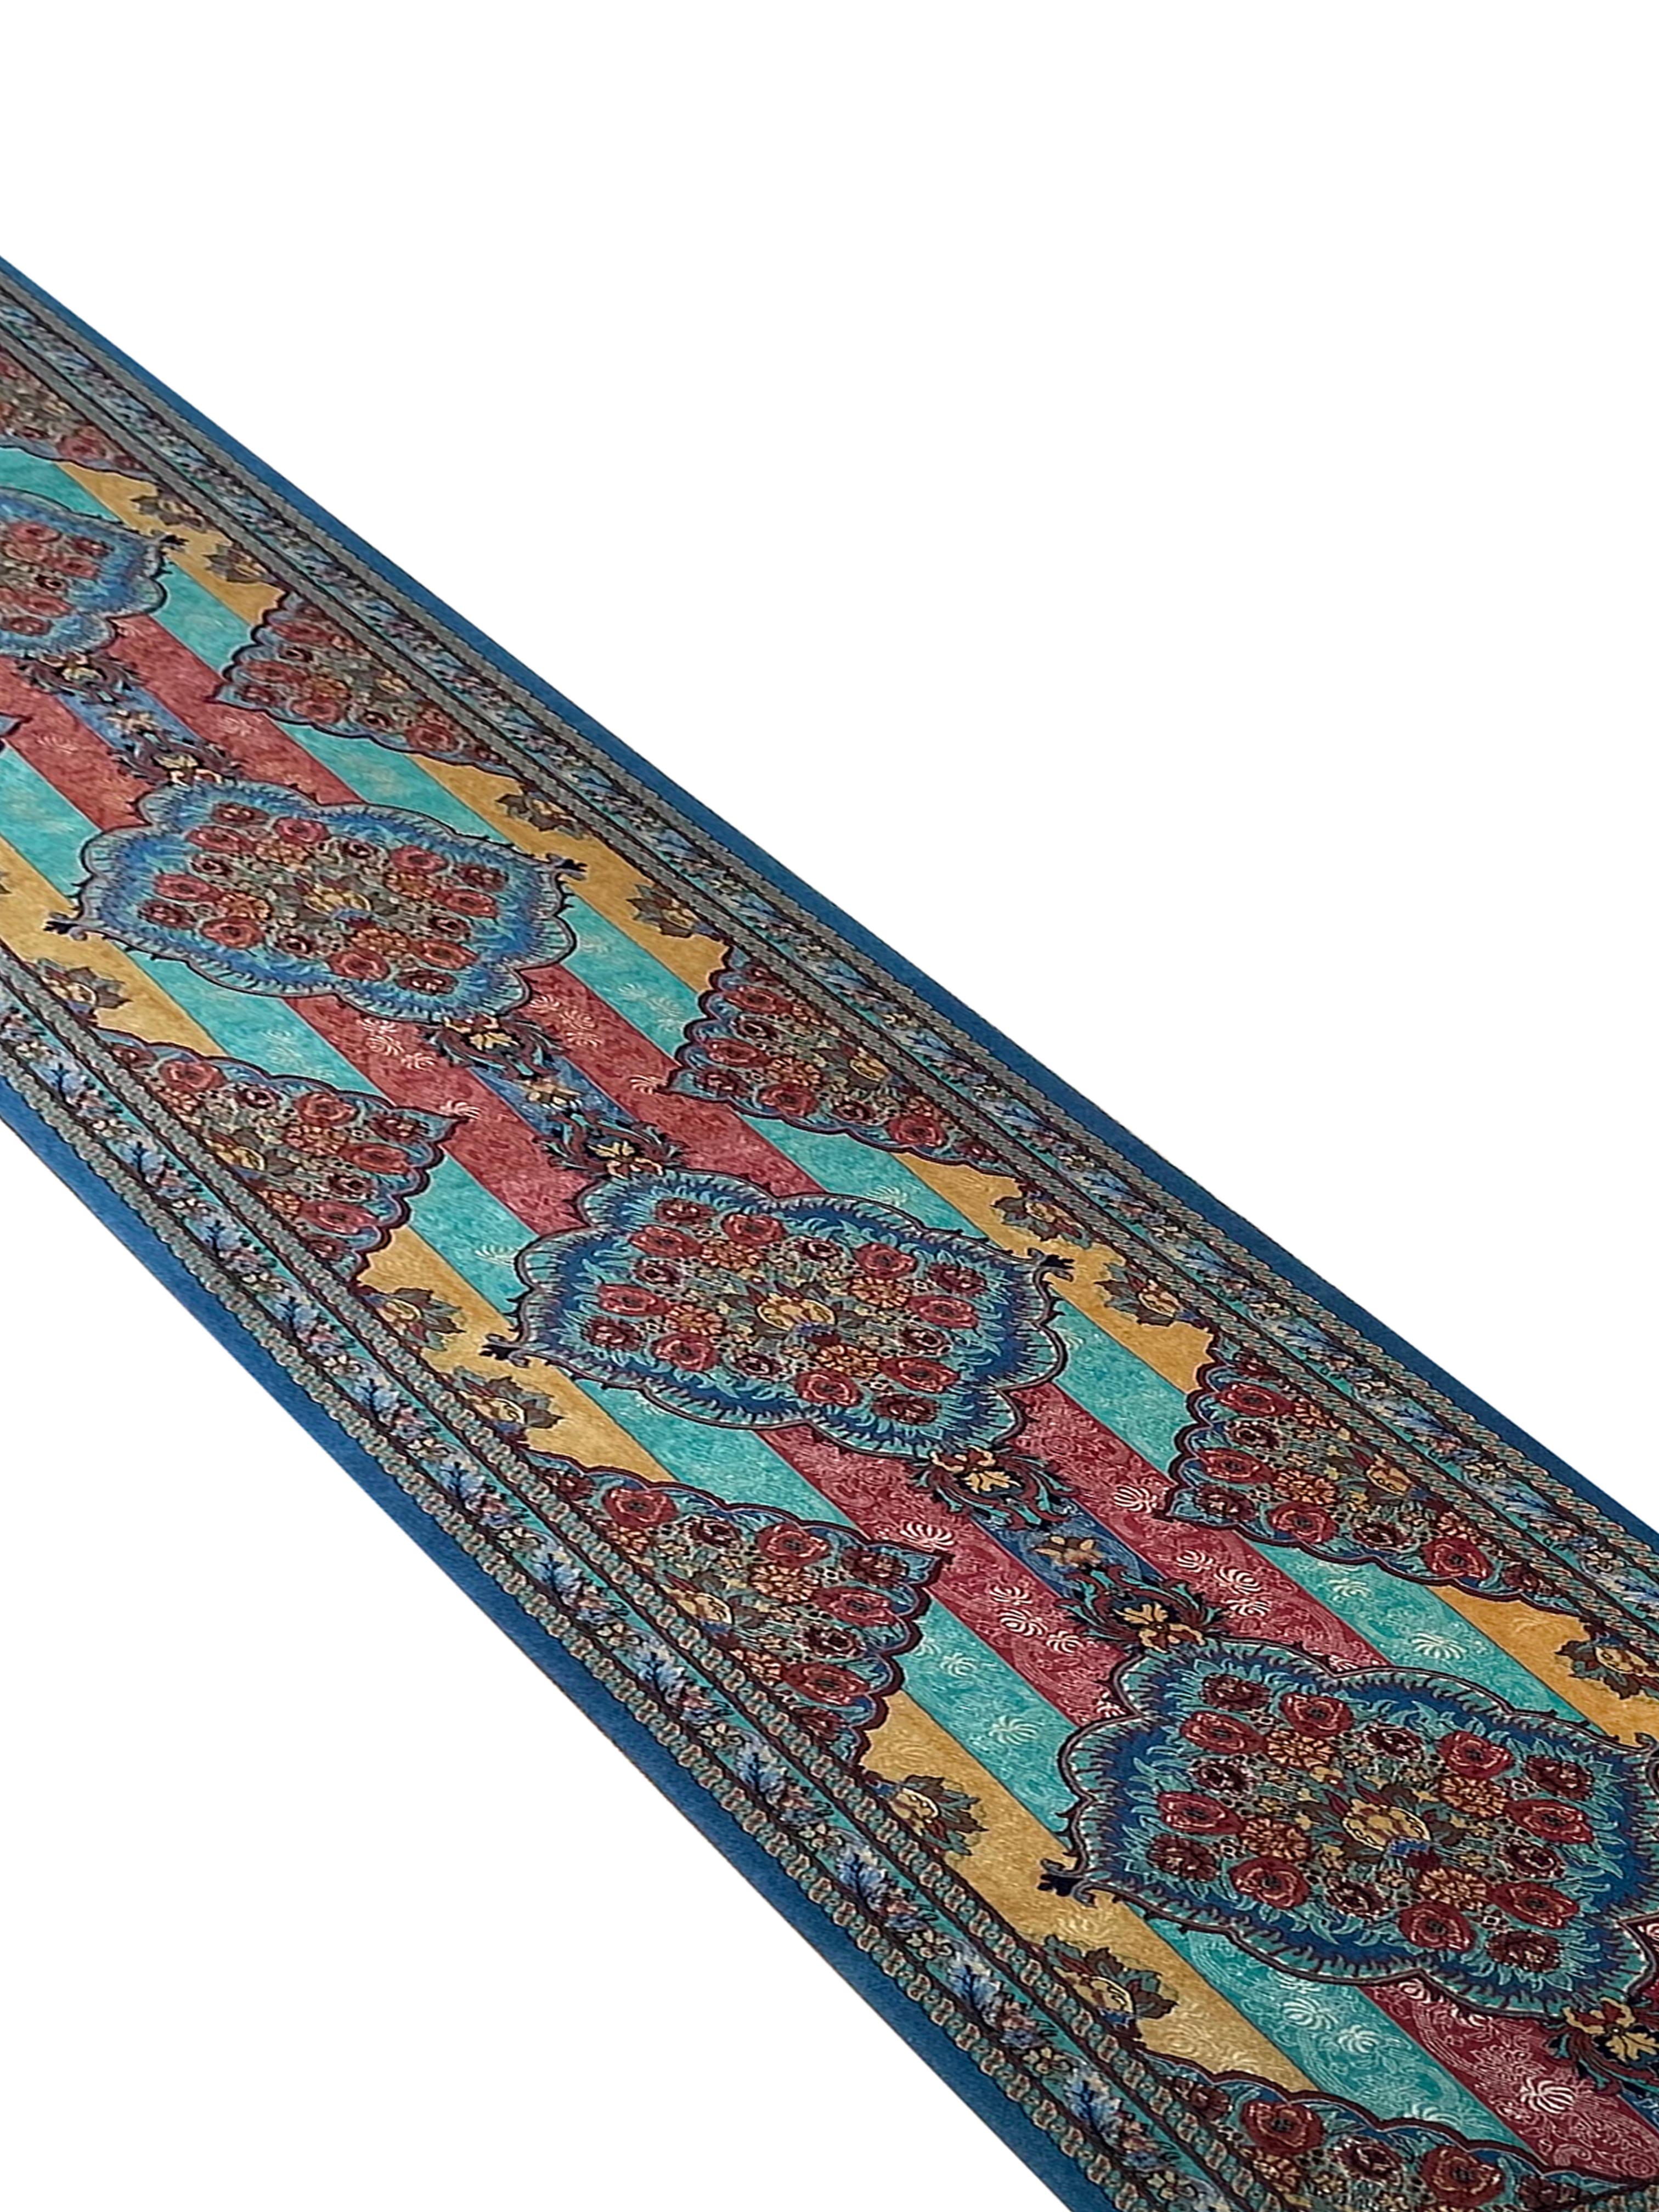 Vegetable Dyed Exclusive Handwoven Carpet Runner Turquoise Geometric Striped Area Rug For Sale